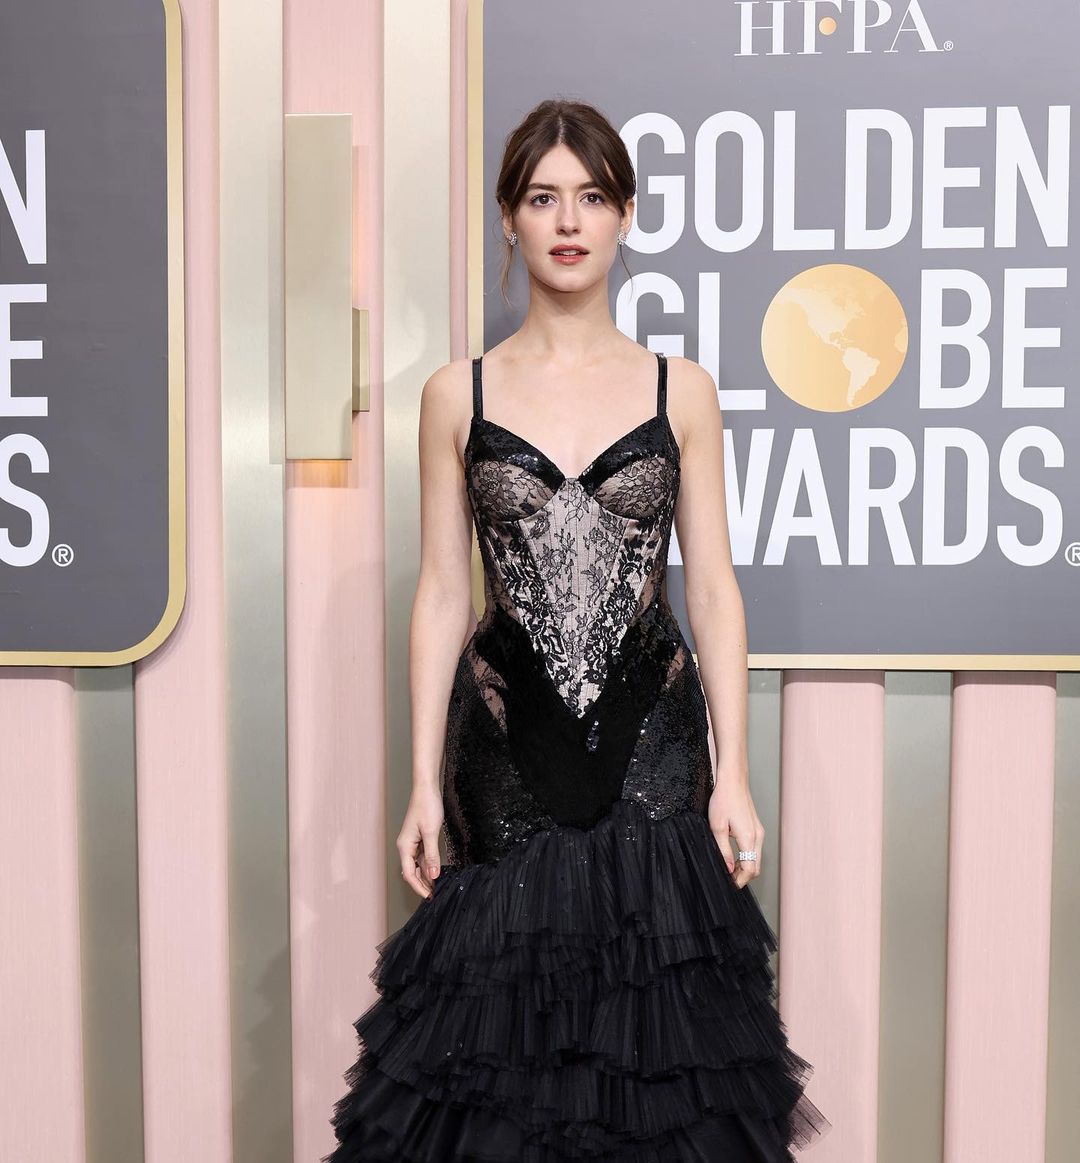 MEGA’s Top 10 Looks From the Golden Globes